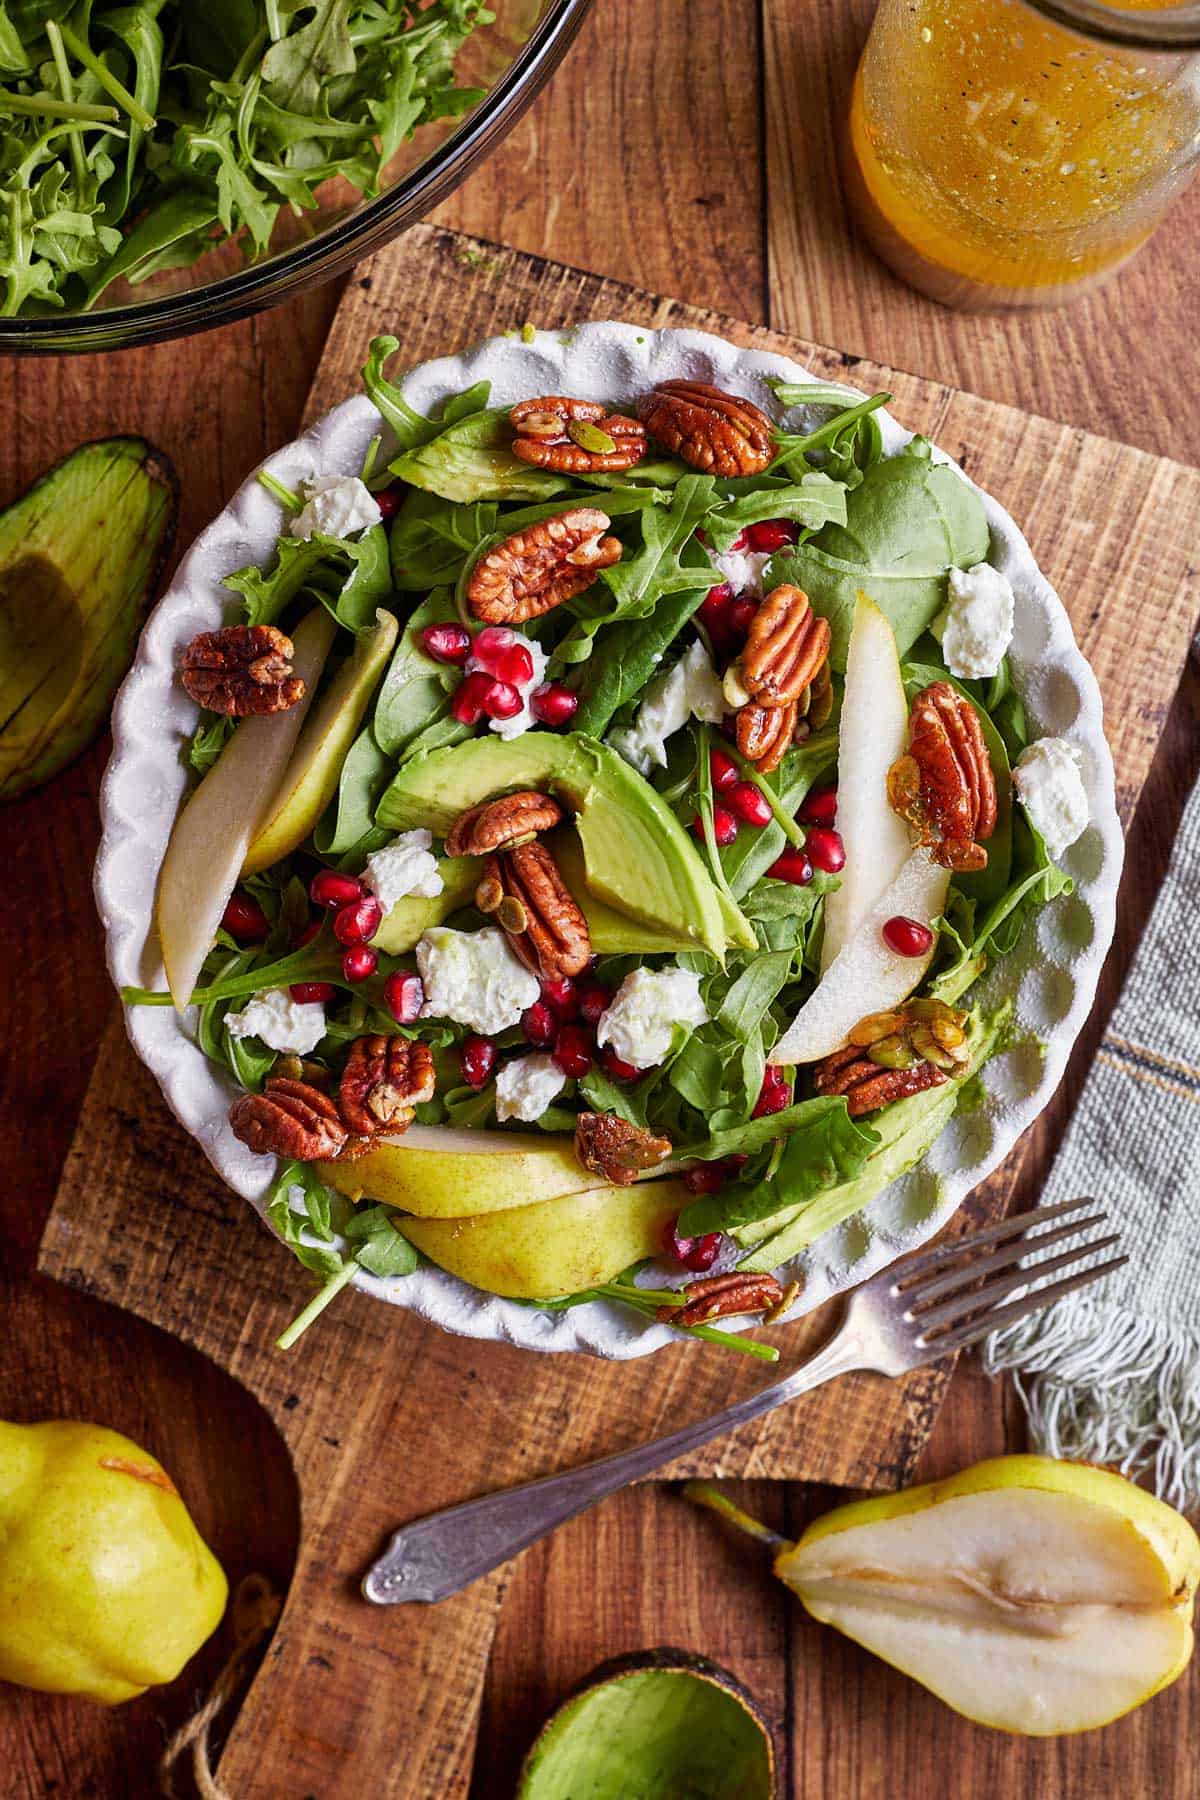 A salad with pears, goats cheese, pecans and pomegranate.